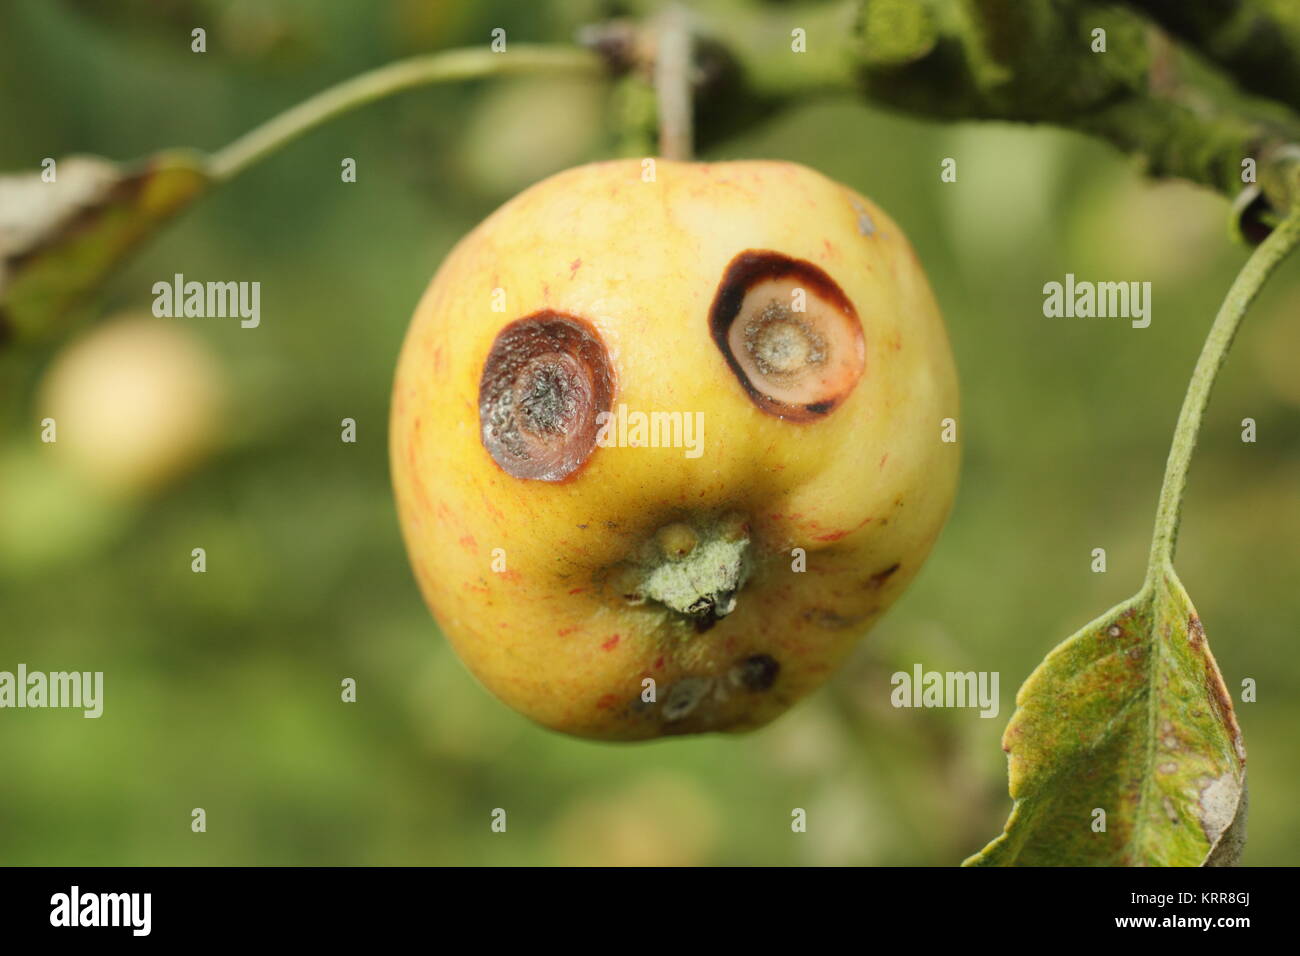 An apple (malus) suffering scab that resembles facial features, hanging from a tree branch in an English orchard, October, UK Stock Photo